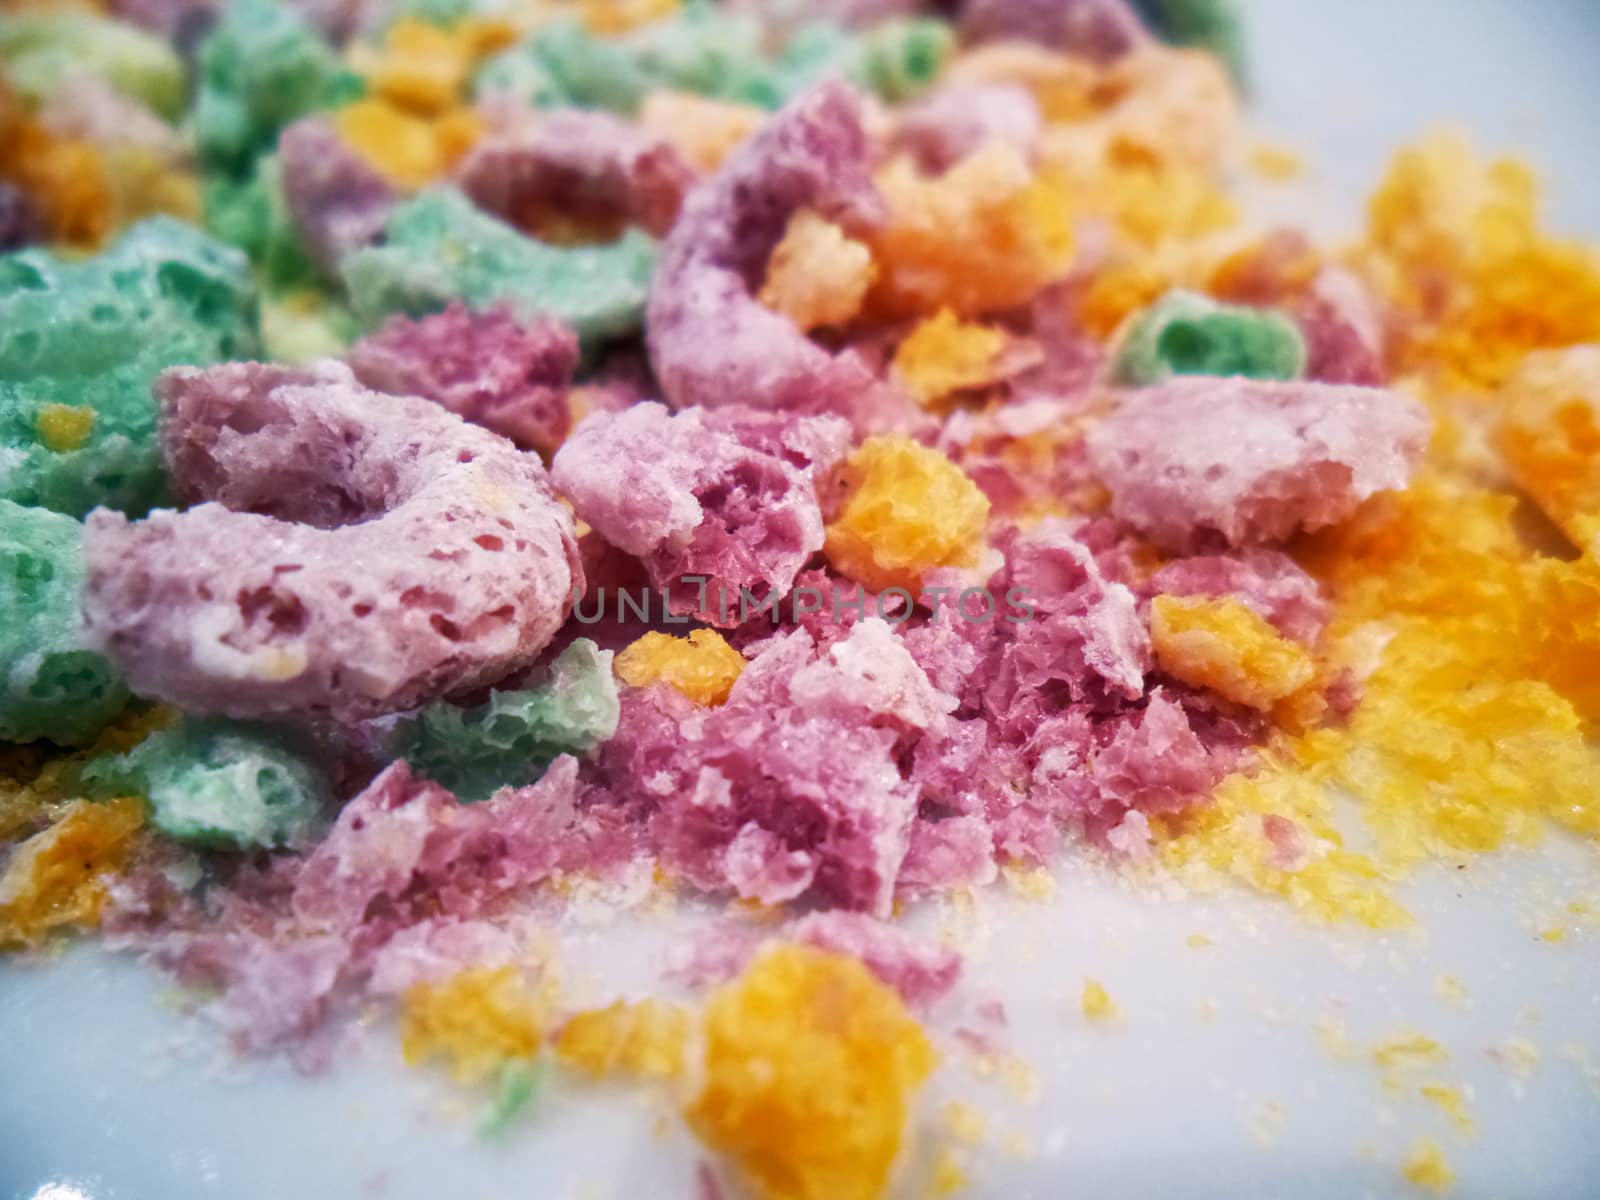 Close up of crushed up sugar coated colorful ceareal loops on white plate or surface